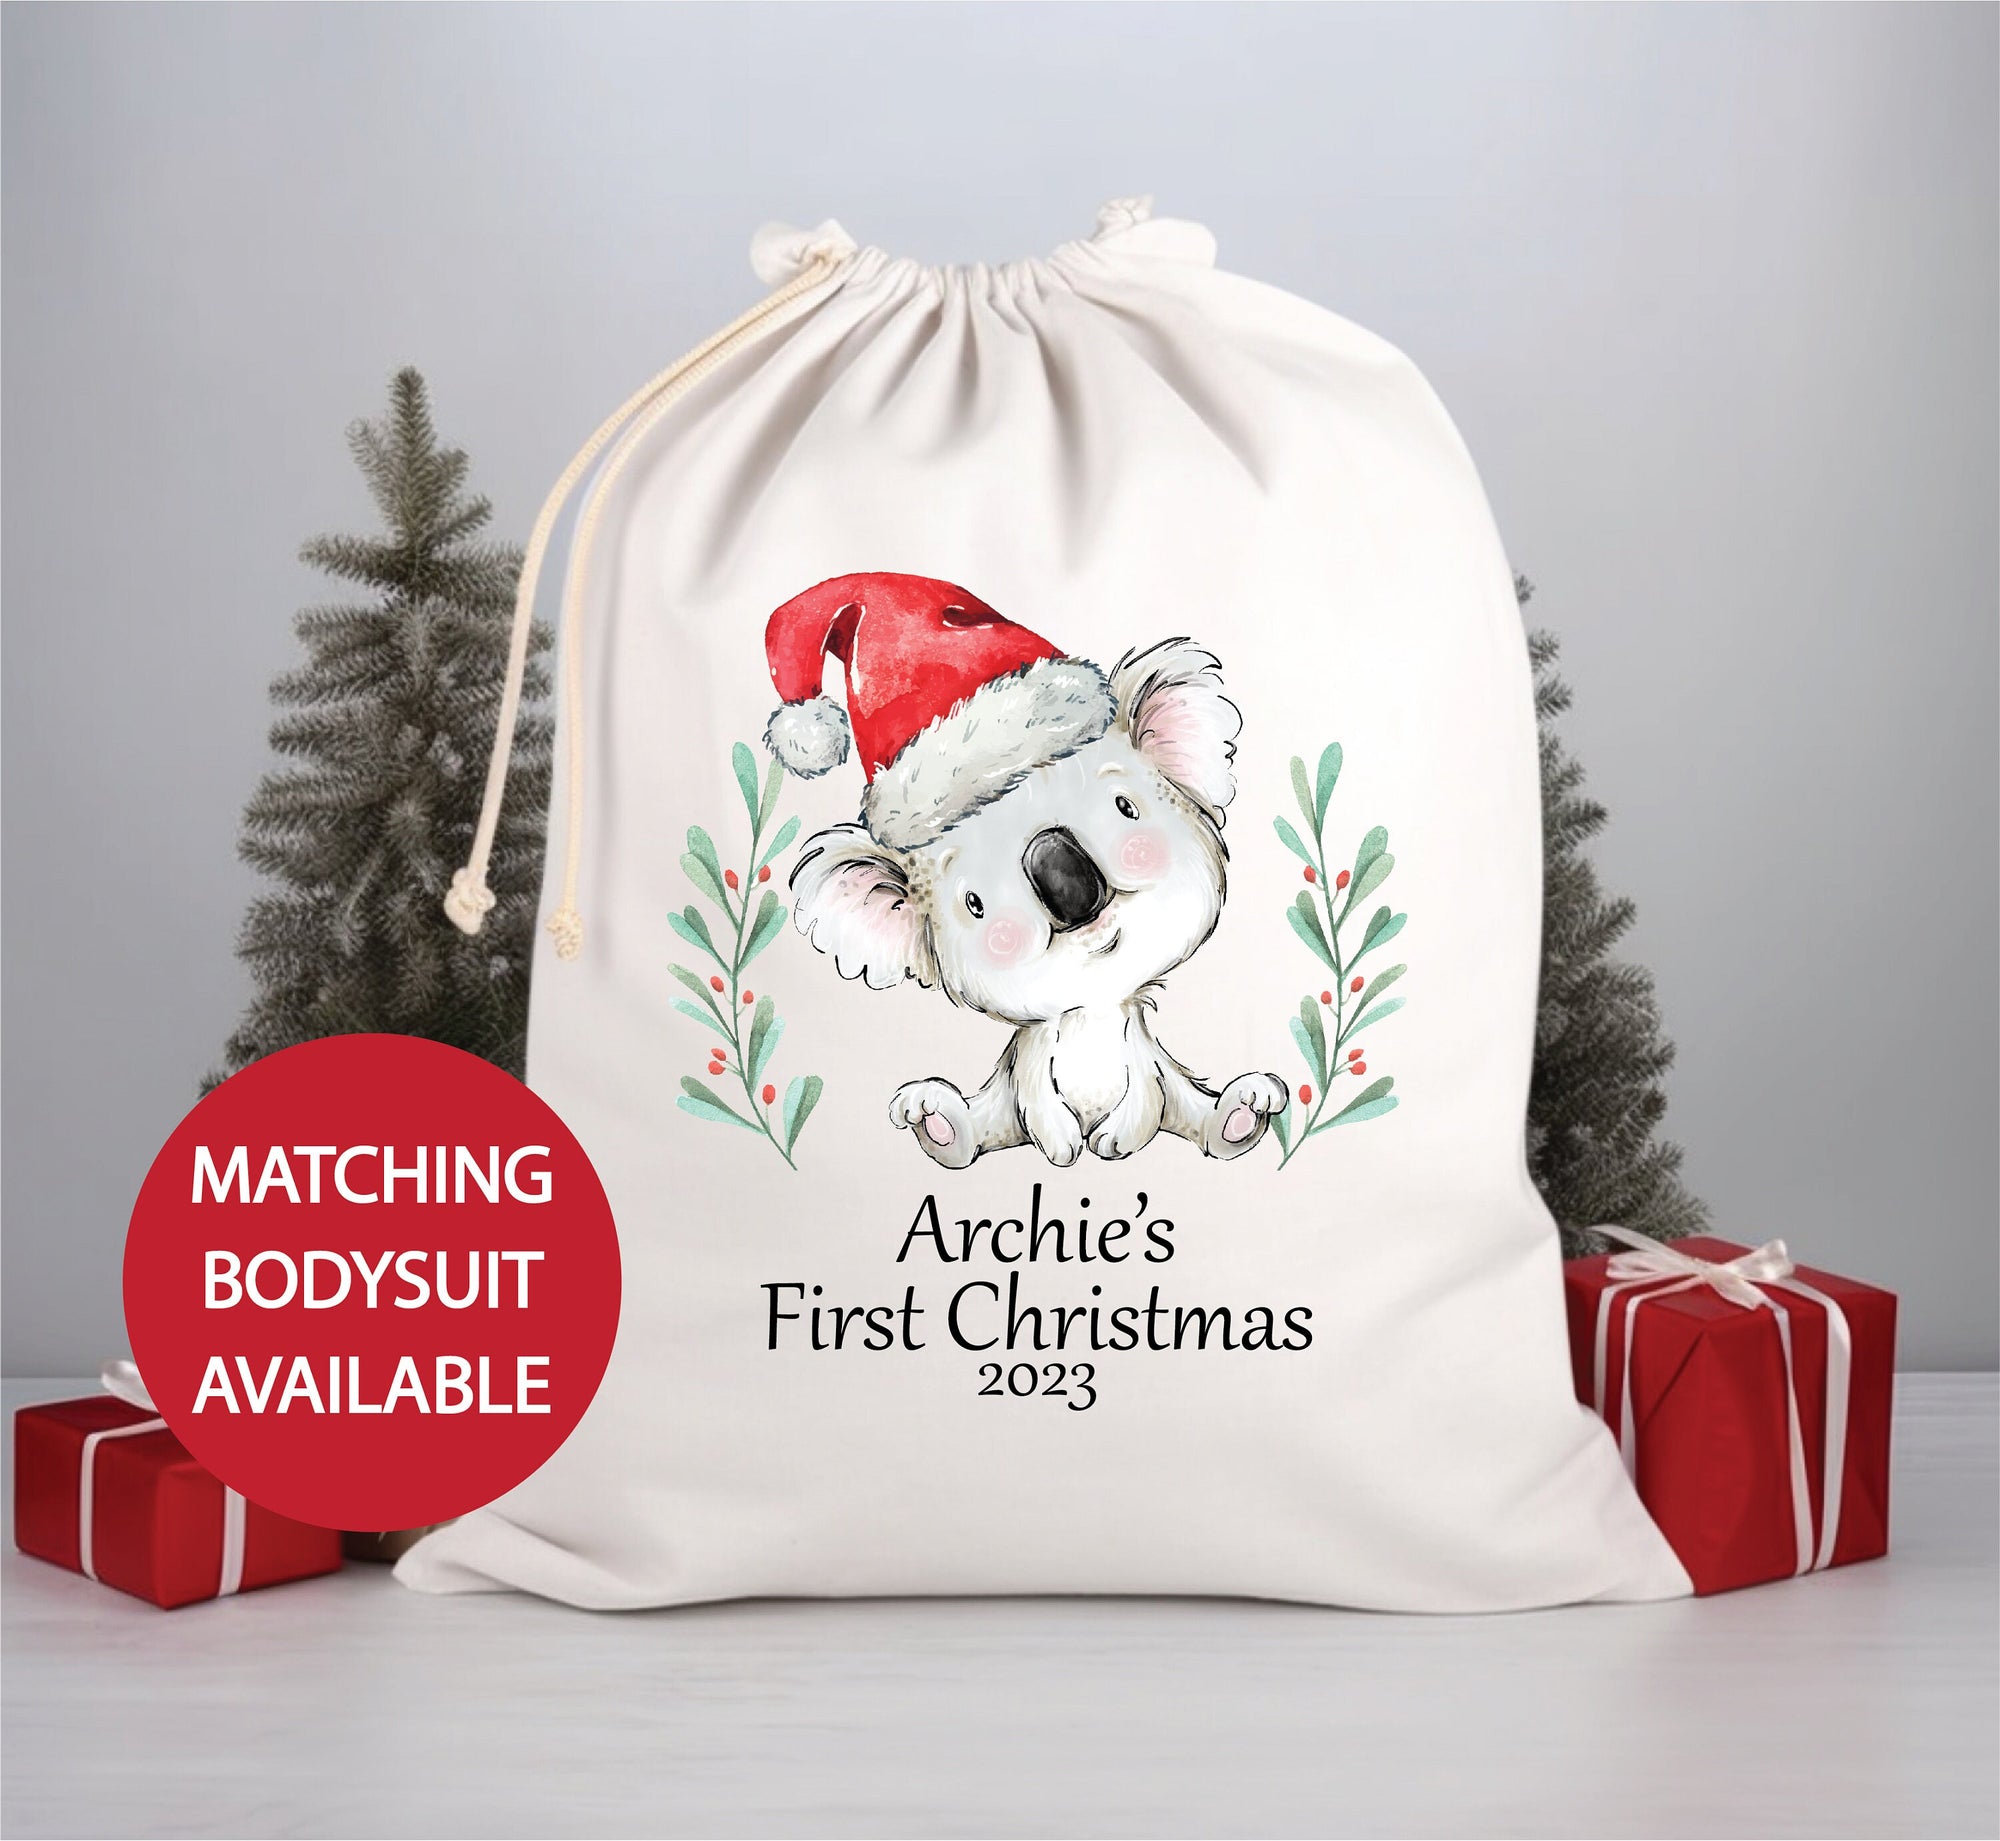 My 1st Christmas Santa Sack With Matching Bodysuit, First Christmas Baby Bodysuit, Unisex Baby Clothes, New Baby's First Christmas, Newborn